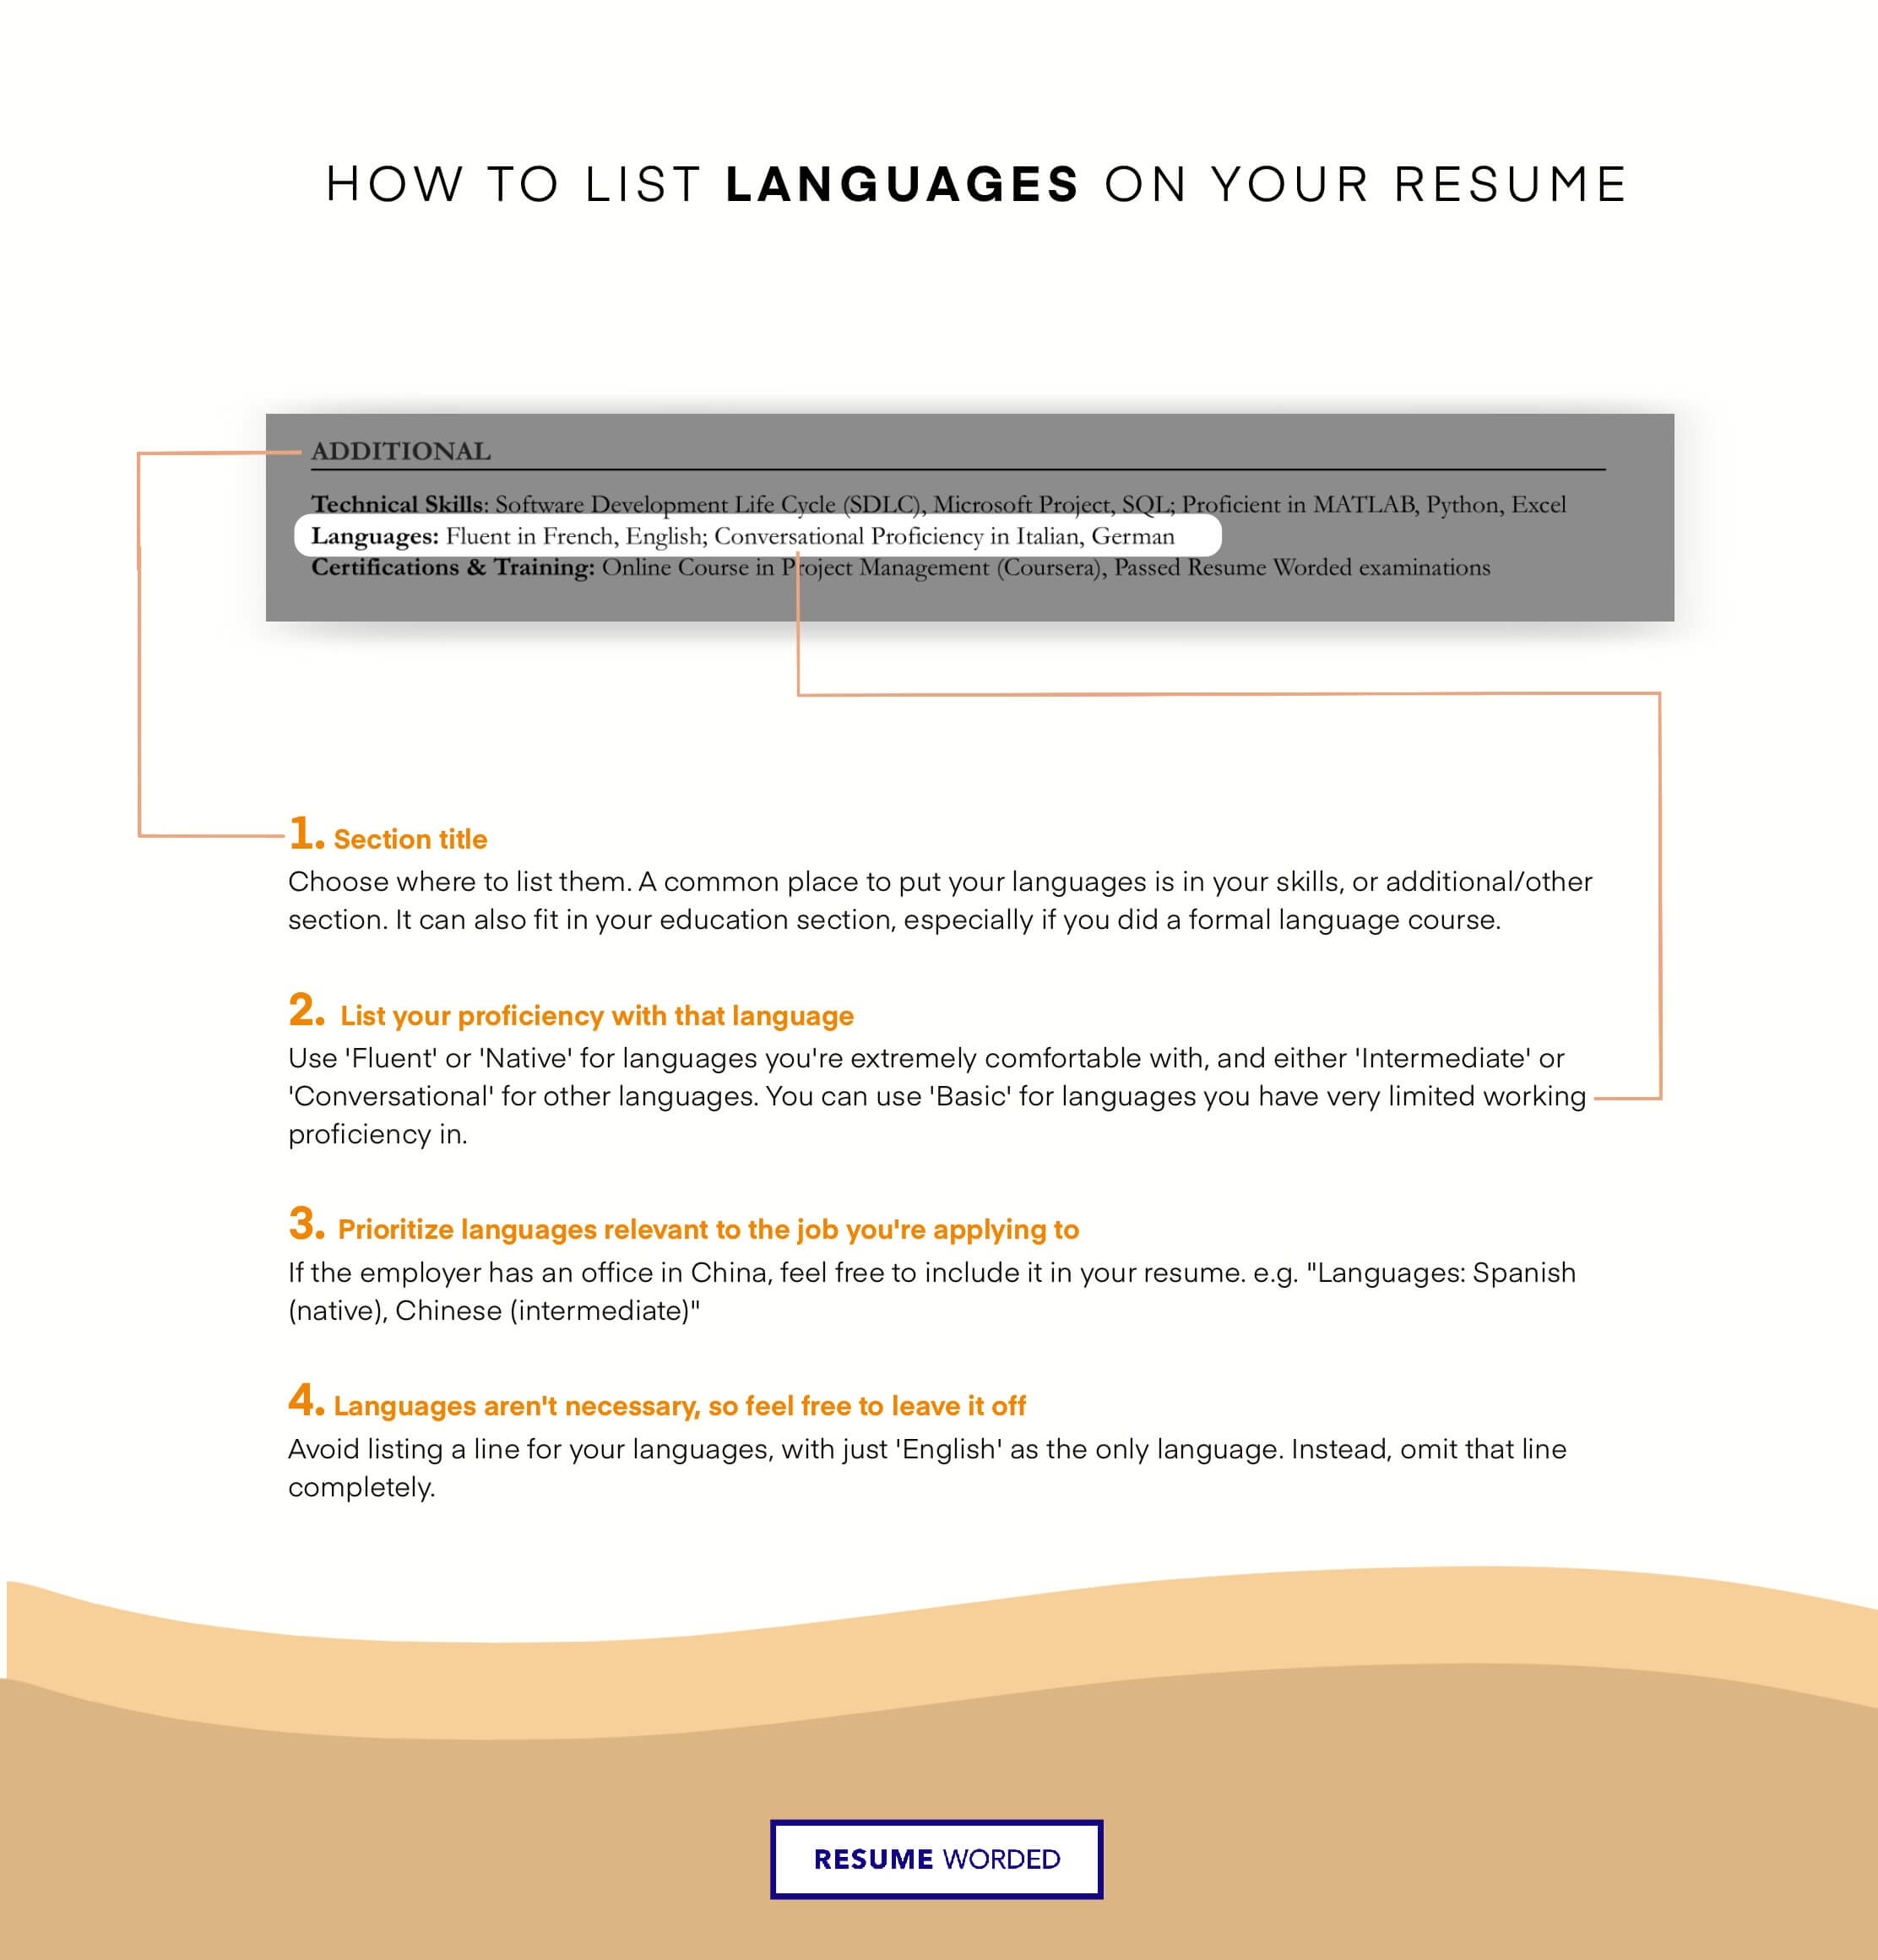 Include all languages spoken if applying to an international company. - Enterprise Account Executive Resume